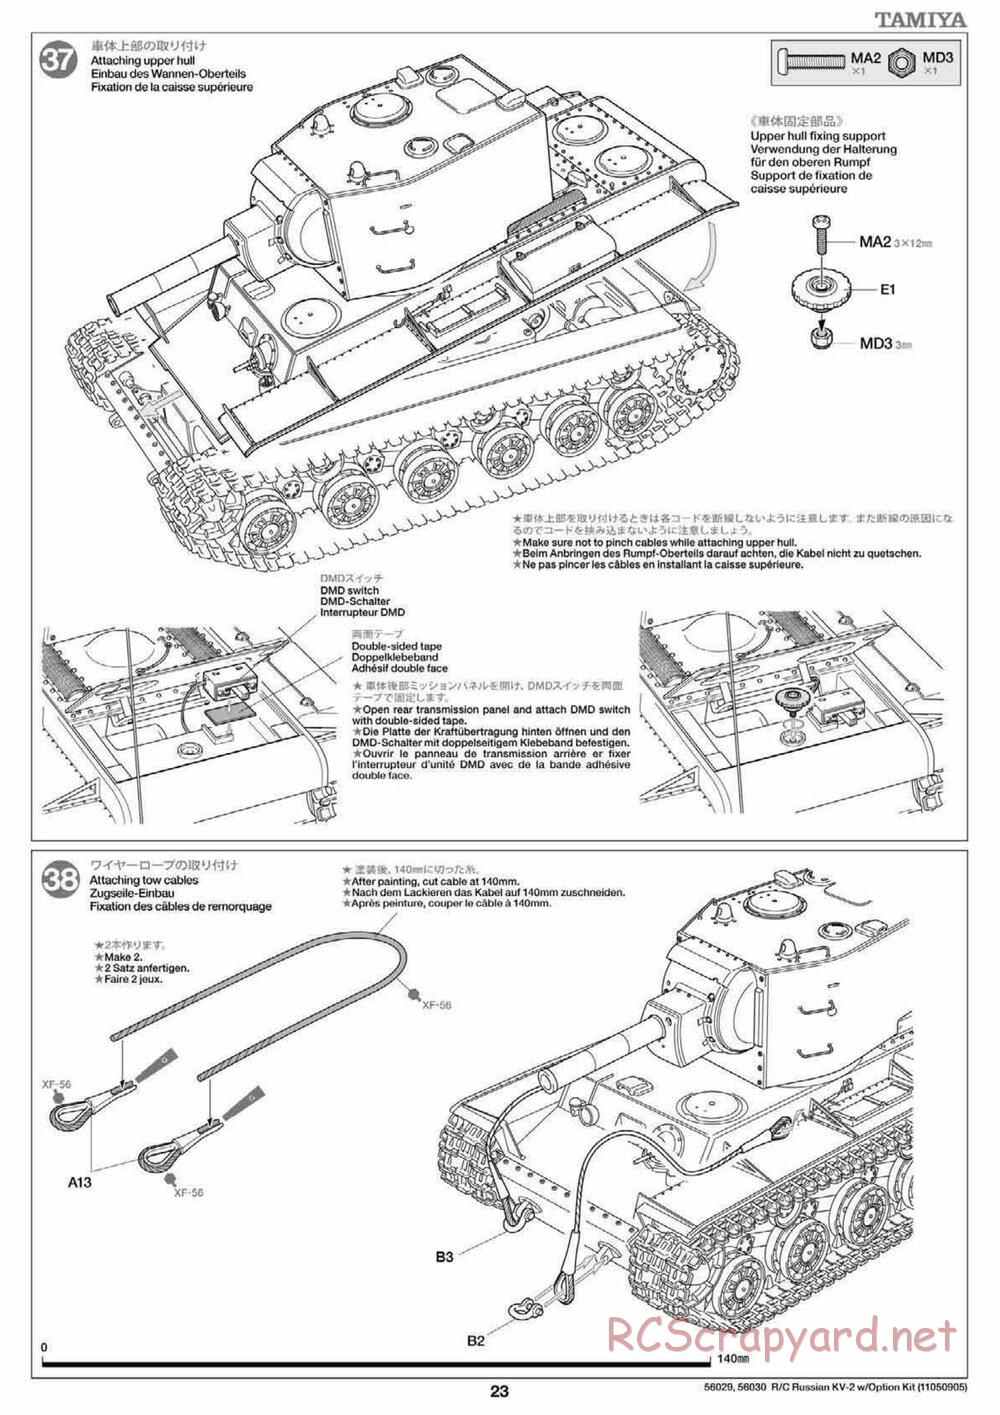 Tamiya - Russian Heavy Tank KV-2 Gigant - 1/16 Scale Chassis - Manual - Page 23